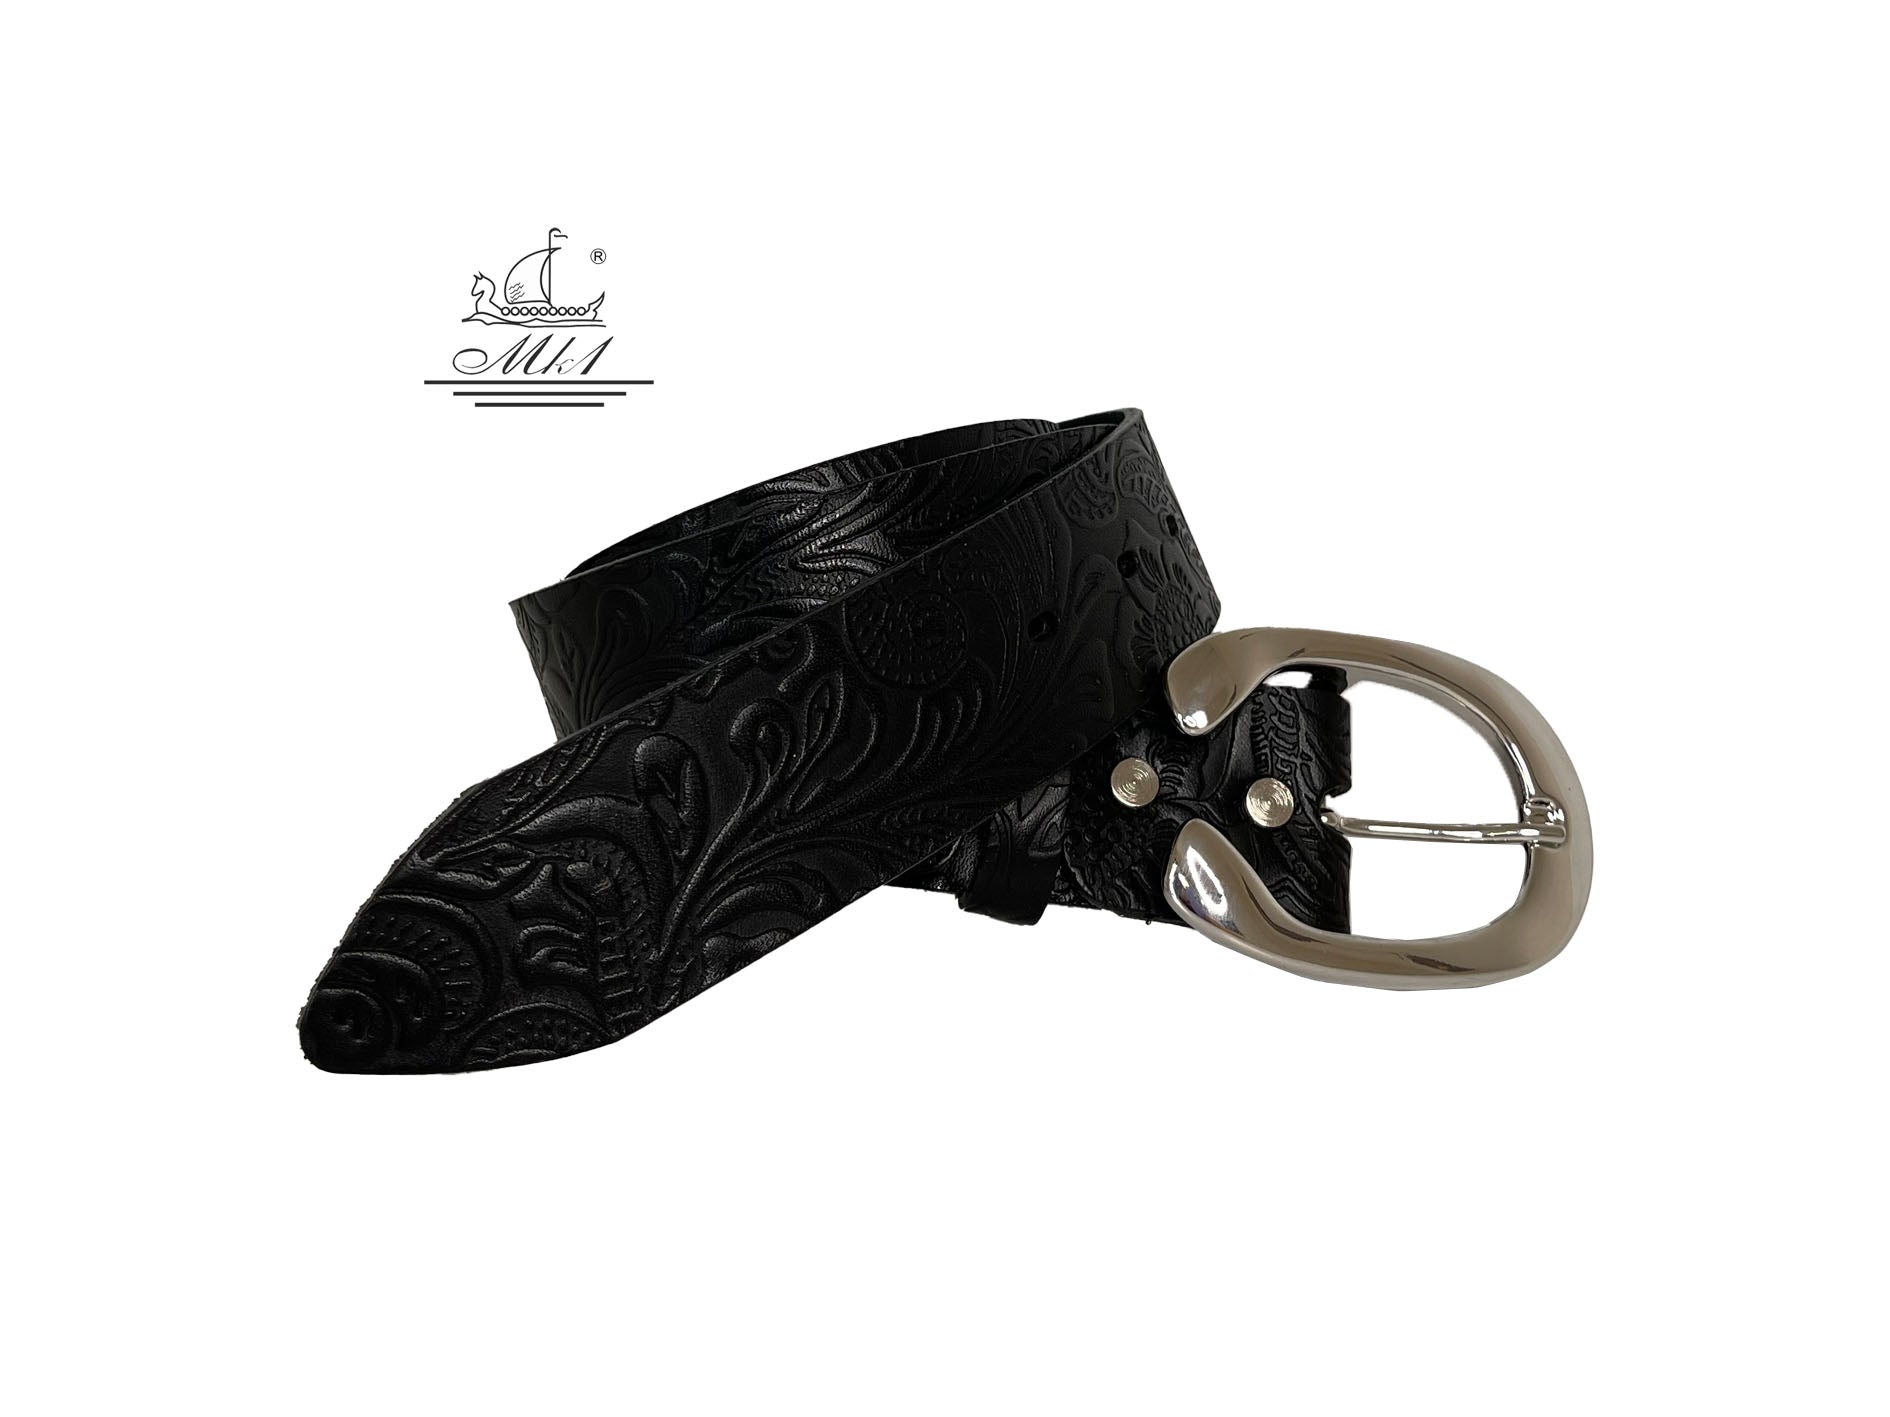 Unisex 4cm wide belt handcrafted from black leather with flower design. 101294/40B/LD